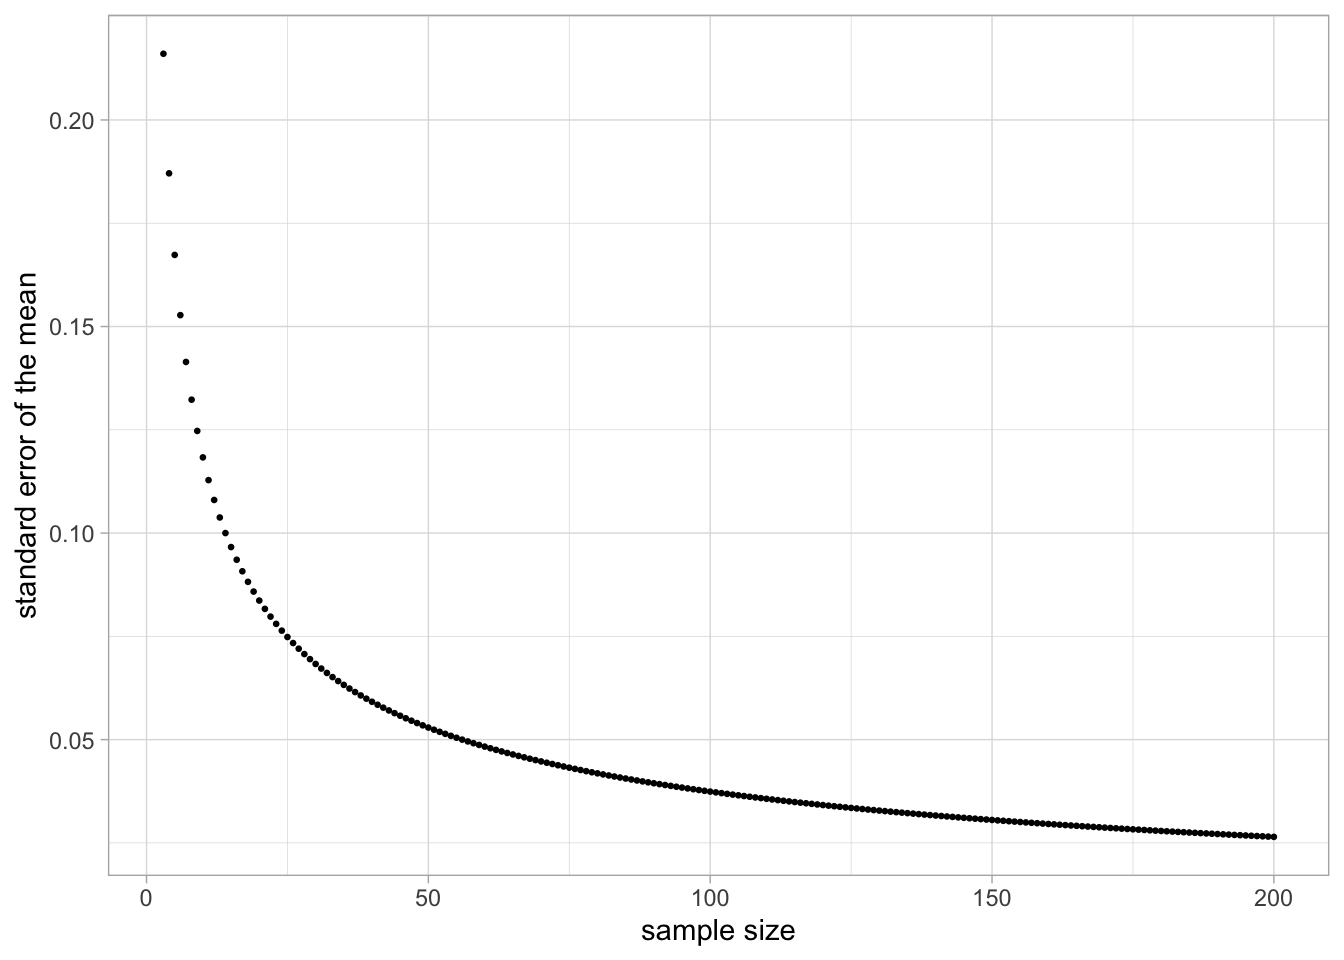 Relationship between sample size and the standard error of the mean, when the population variance equals 0.14.